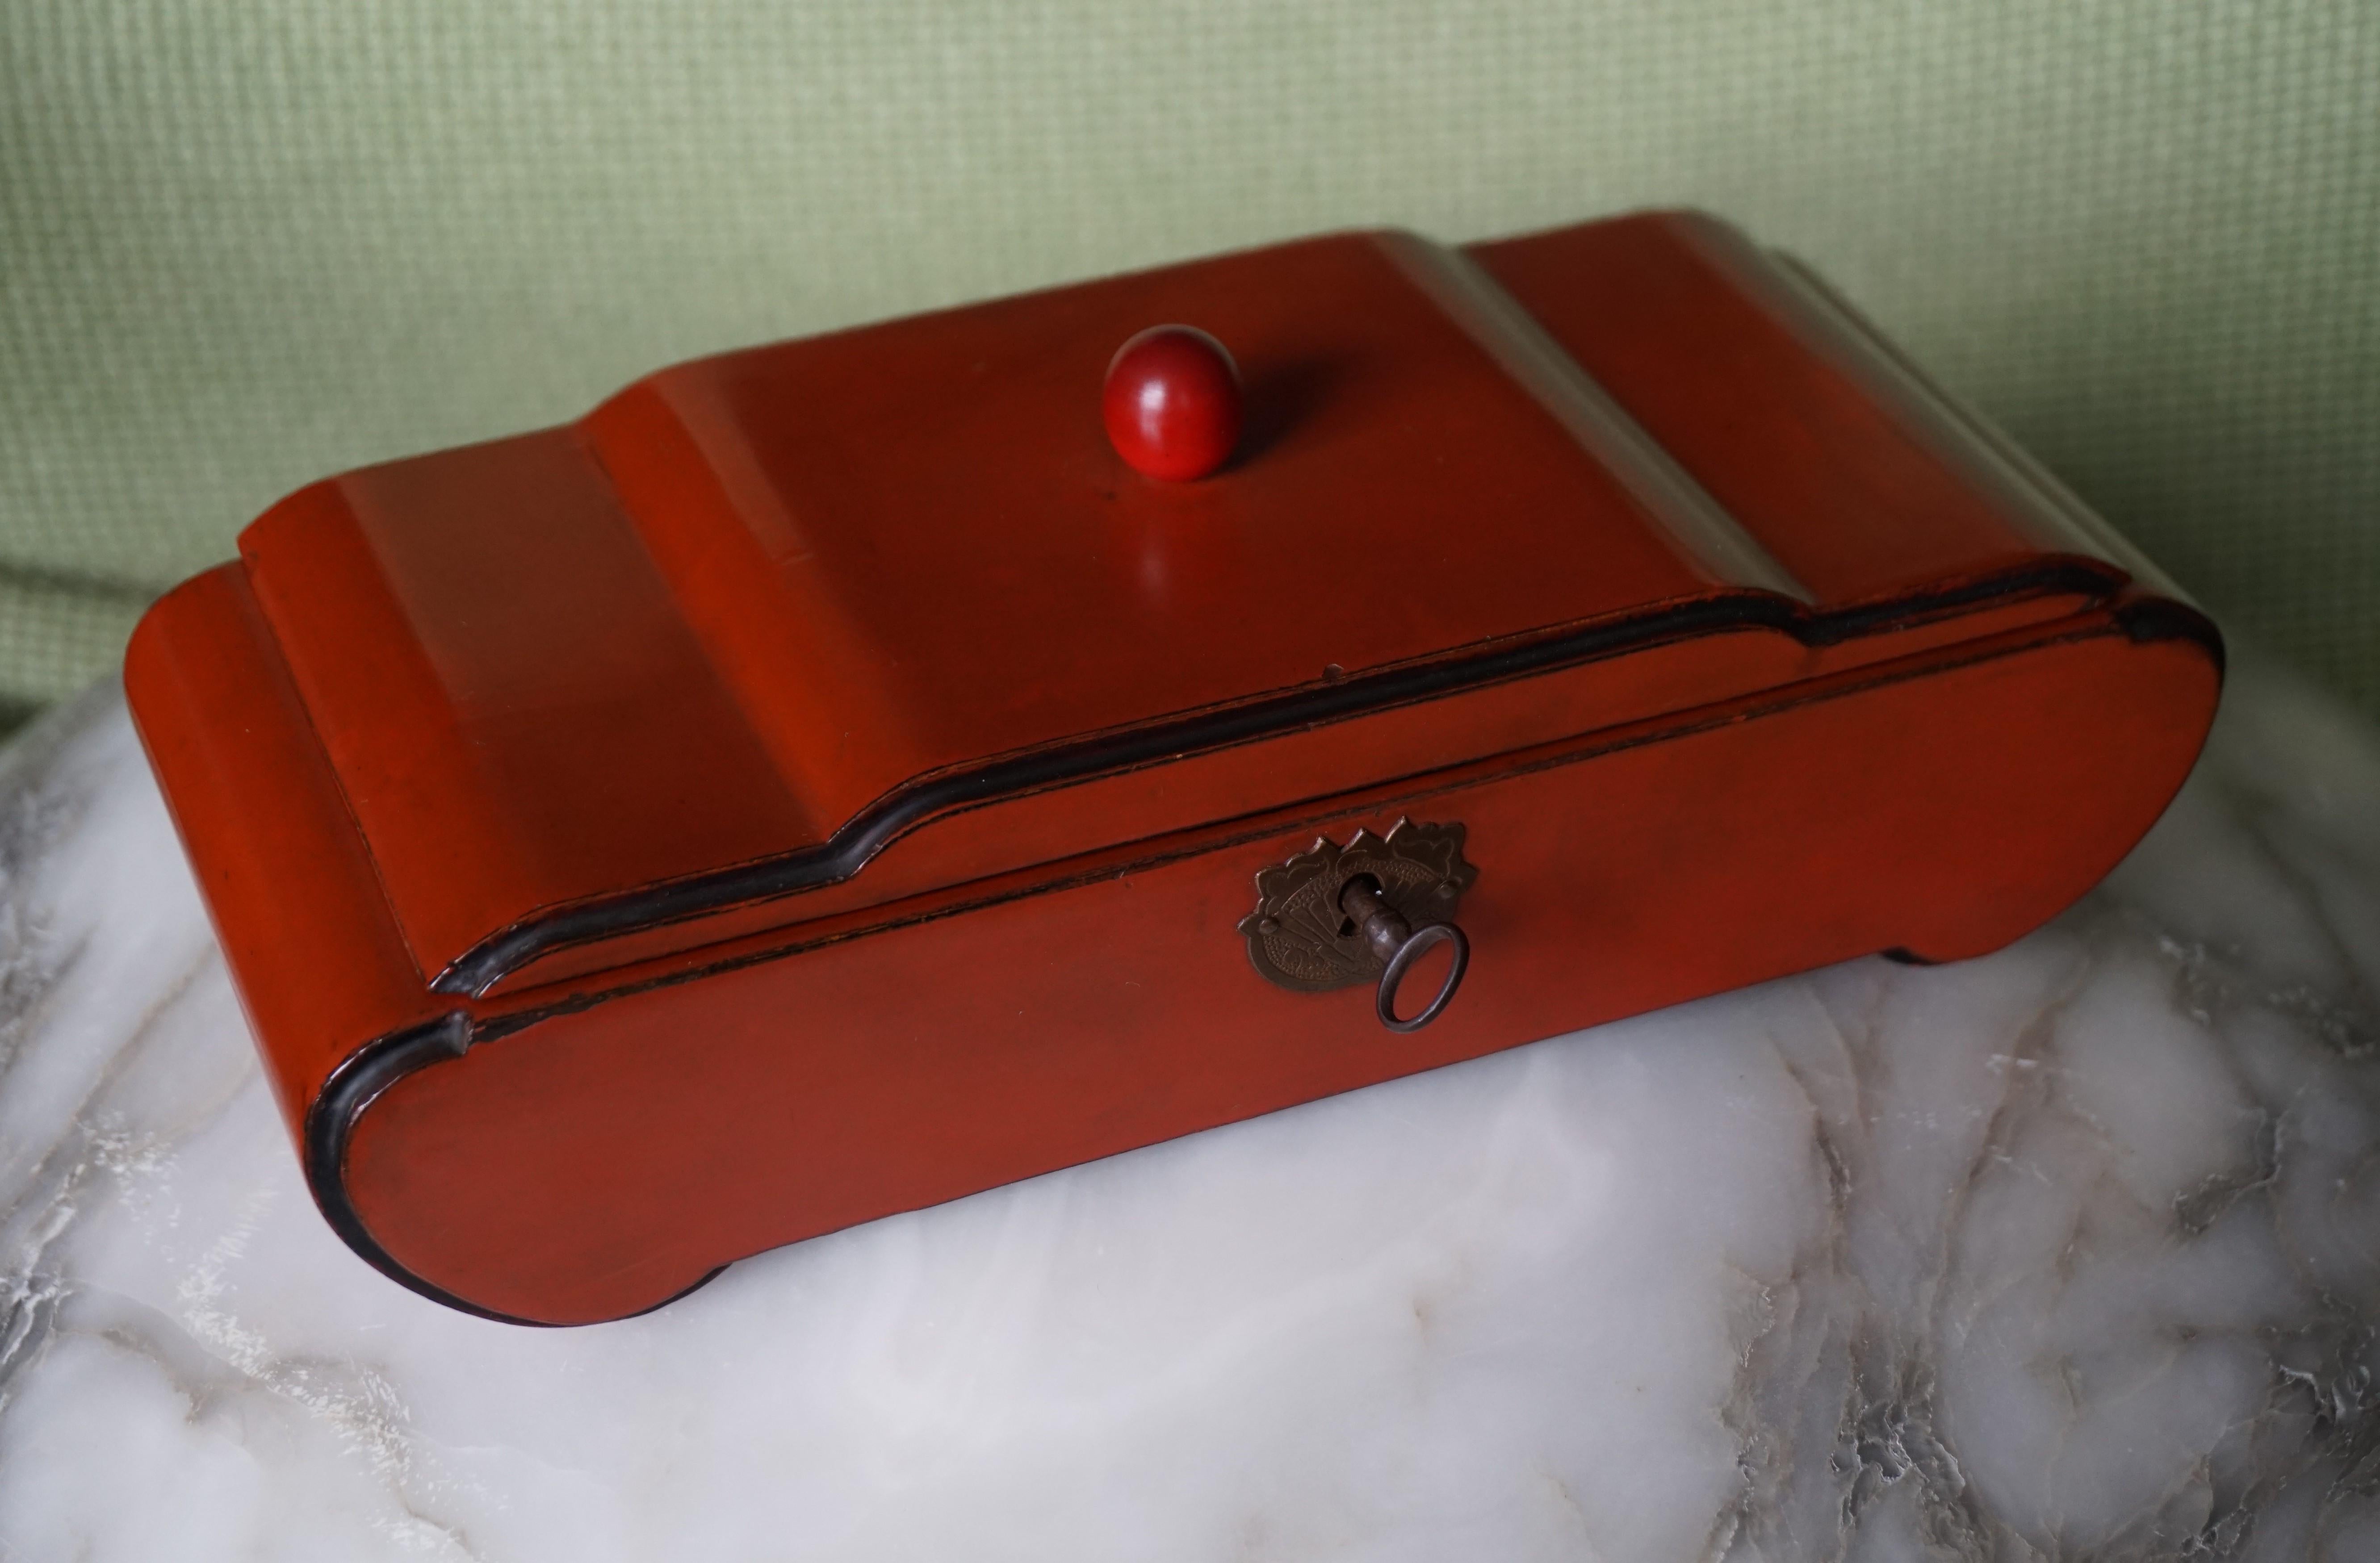 European Great Design and Excellent Condition 1920s Red Lacquered Wooden Art Deco Box For Sale